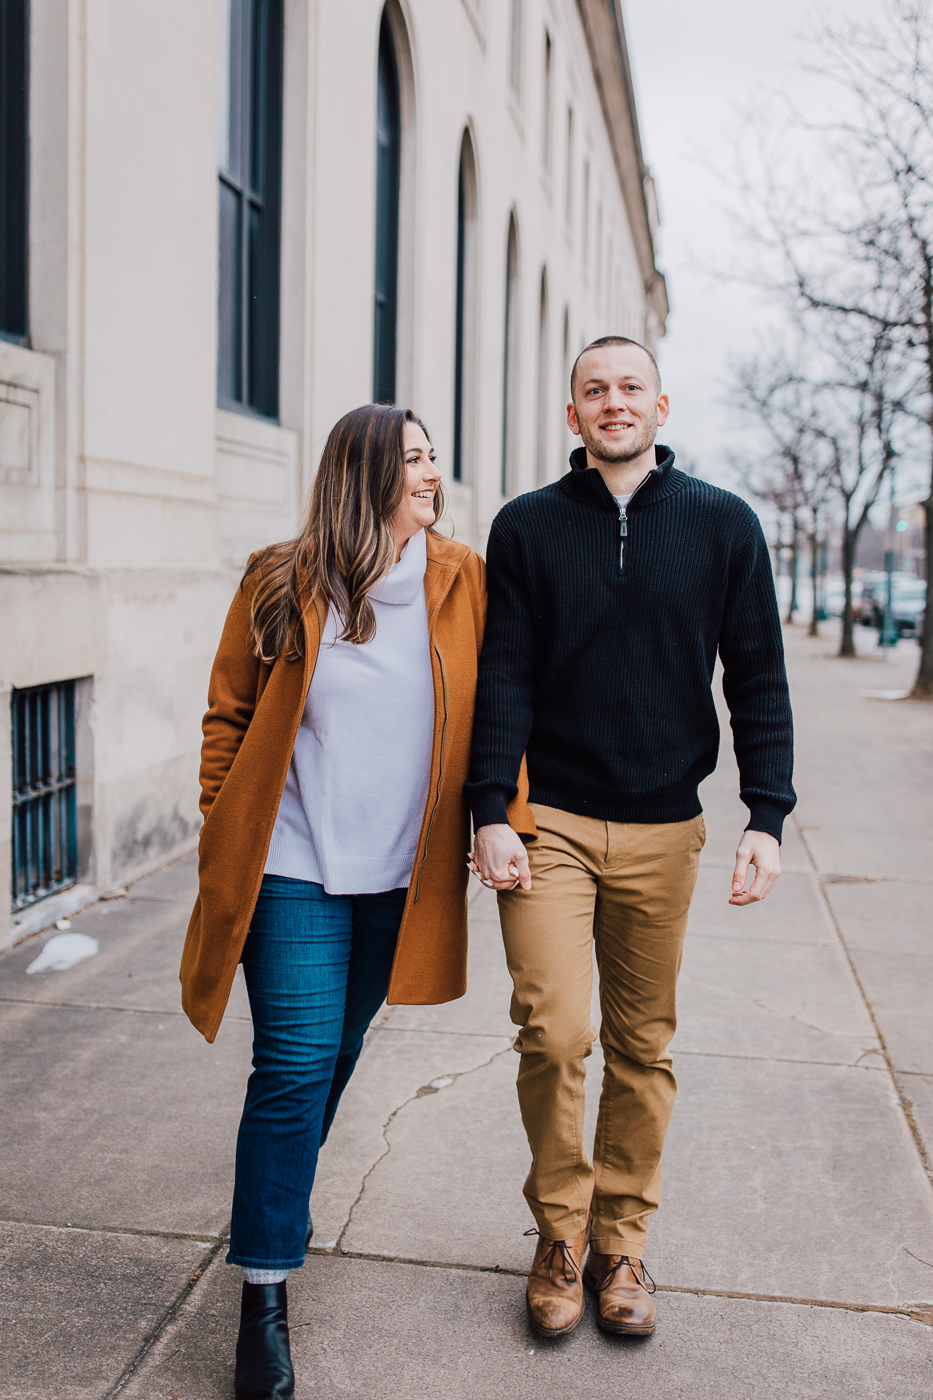  Engaged couple walks through Clinton Square in downtown Syracuse during a winter photo shoot with Briittany Juravich 